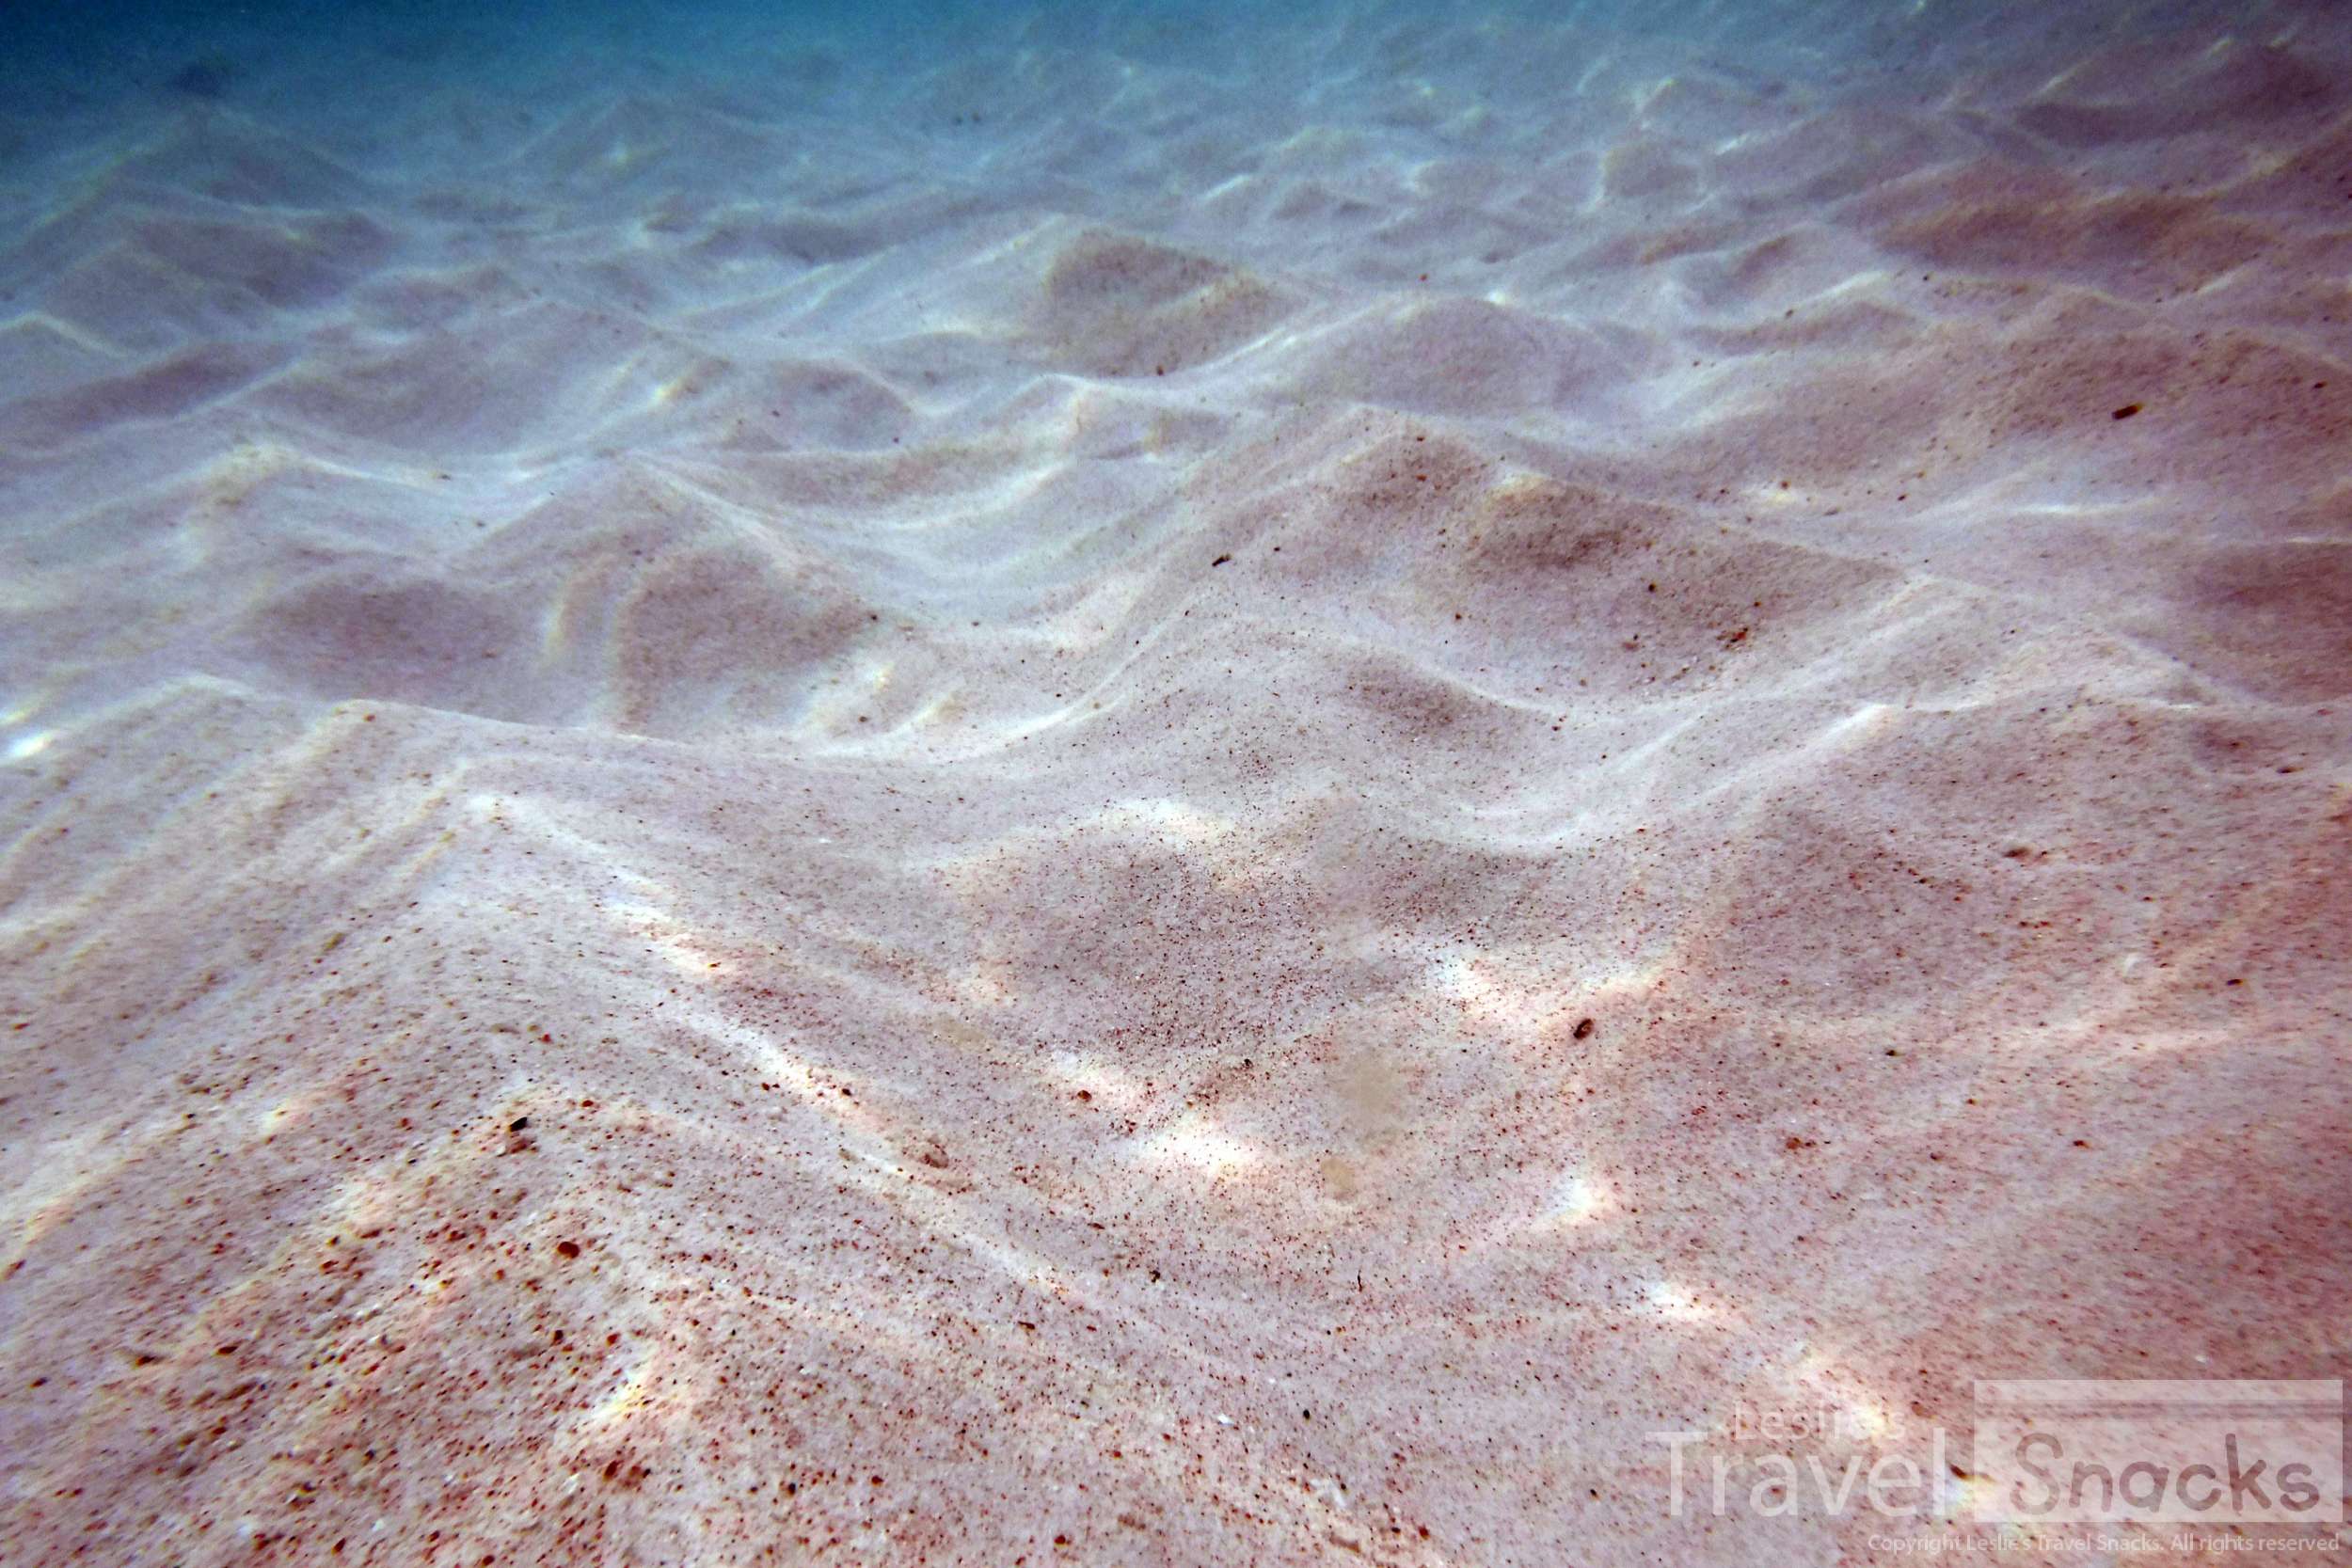 The small pieces of red coral in the sand are what make it pink.